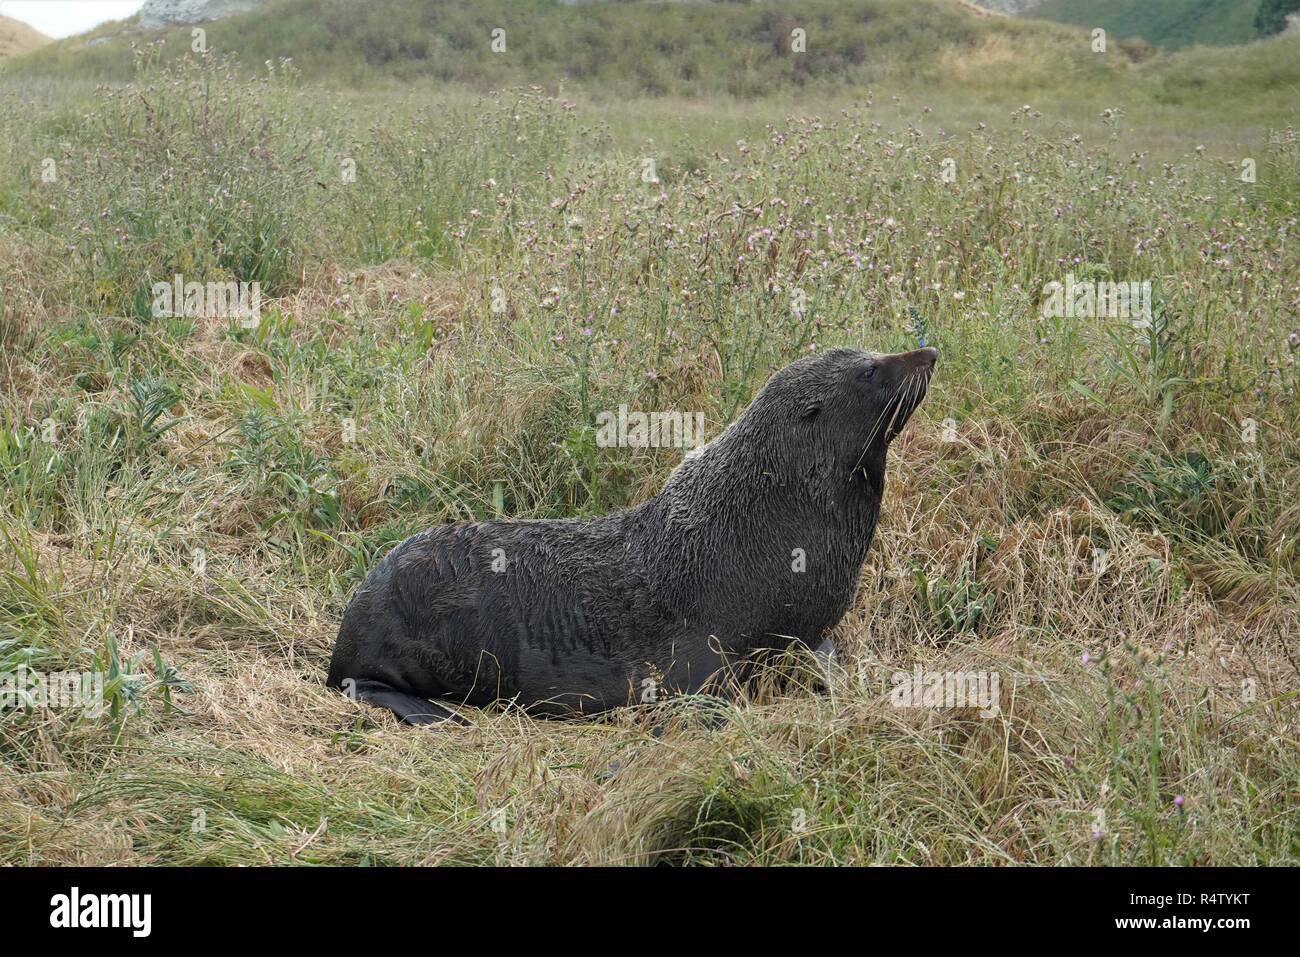 Seal in the field of green grass, Kaikoura New Zealand South Island Stock Photo